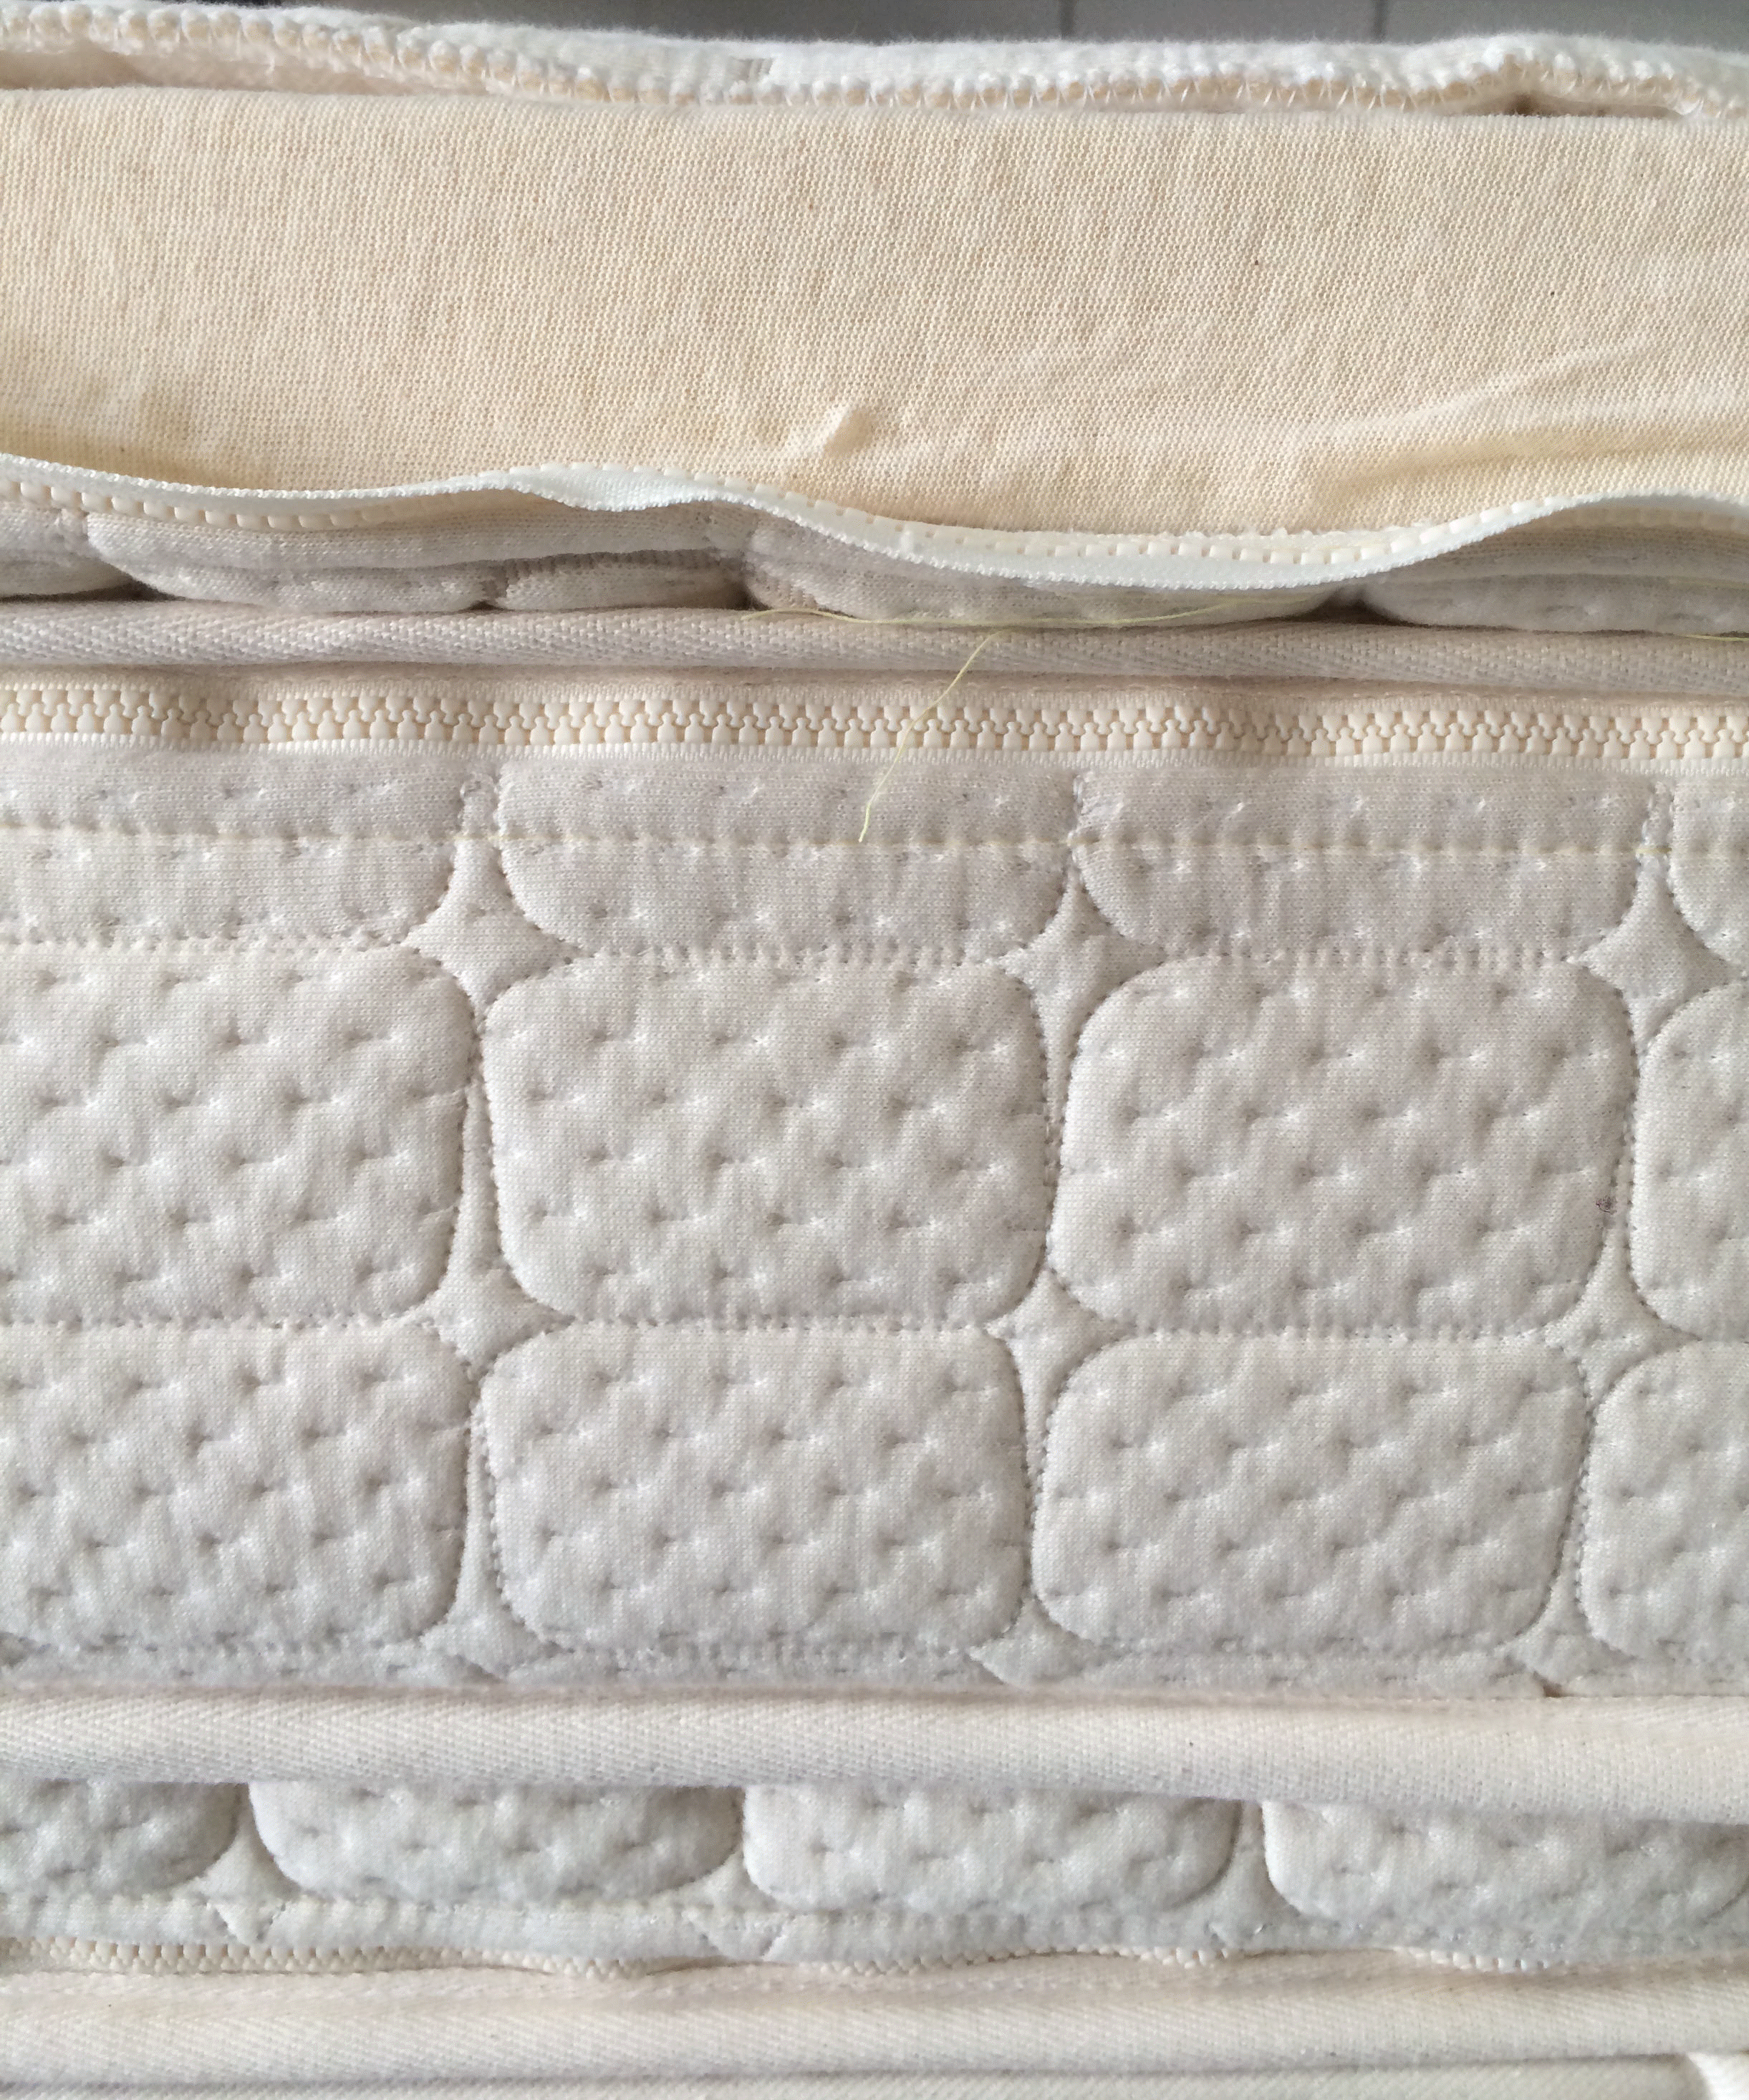 The Ultimate Latex Mattress best quality highest rated